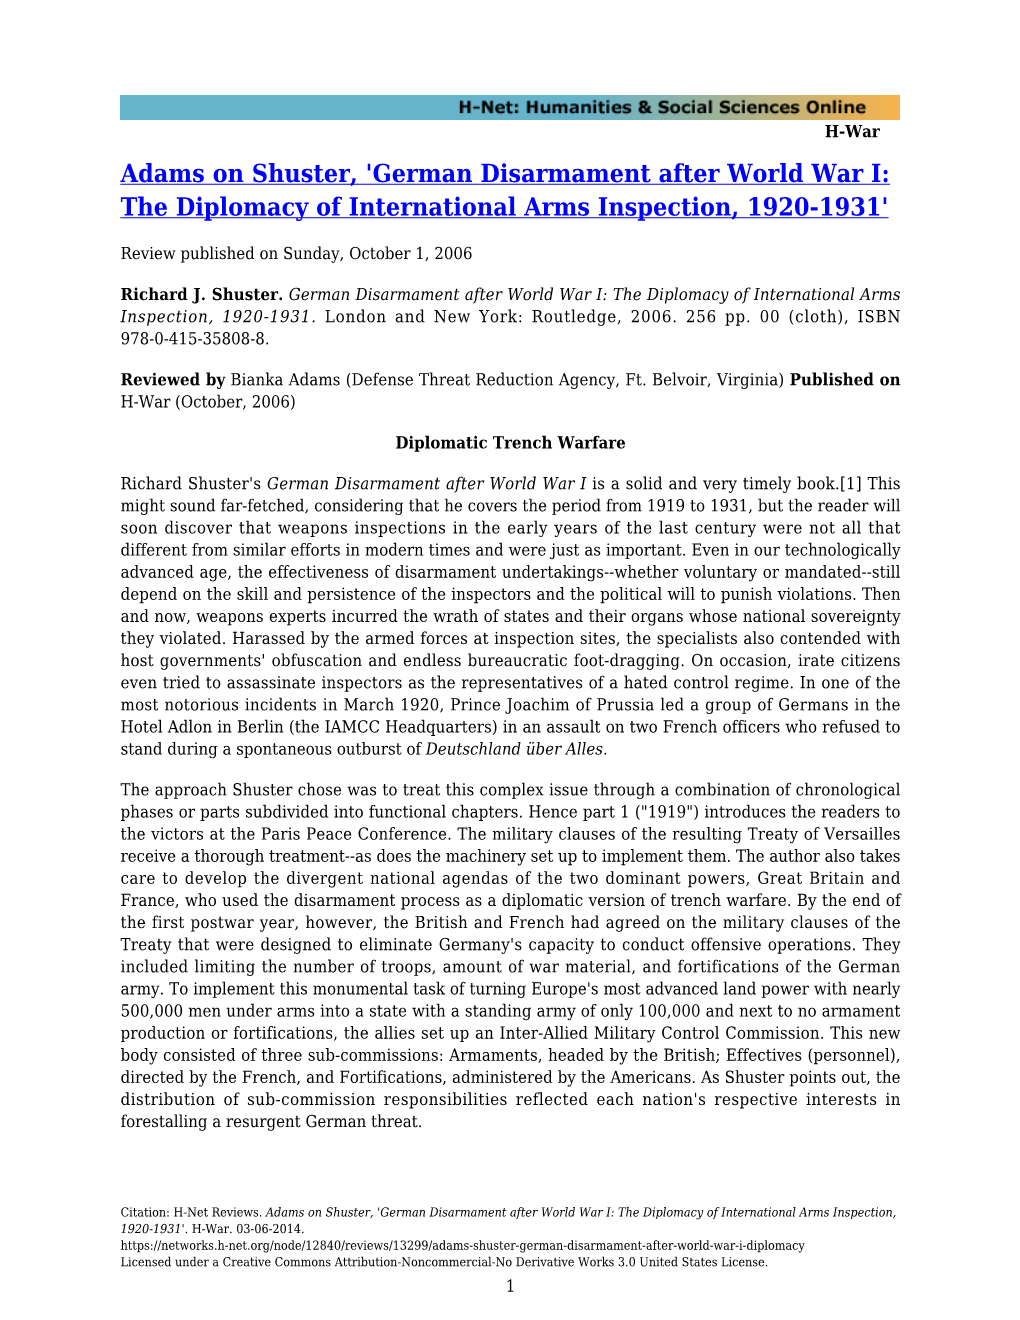 German Disarmament After World War I: the Diplomacy of International Arms Inspection, 1920-1931'